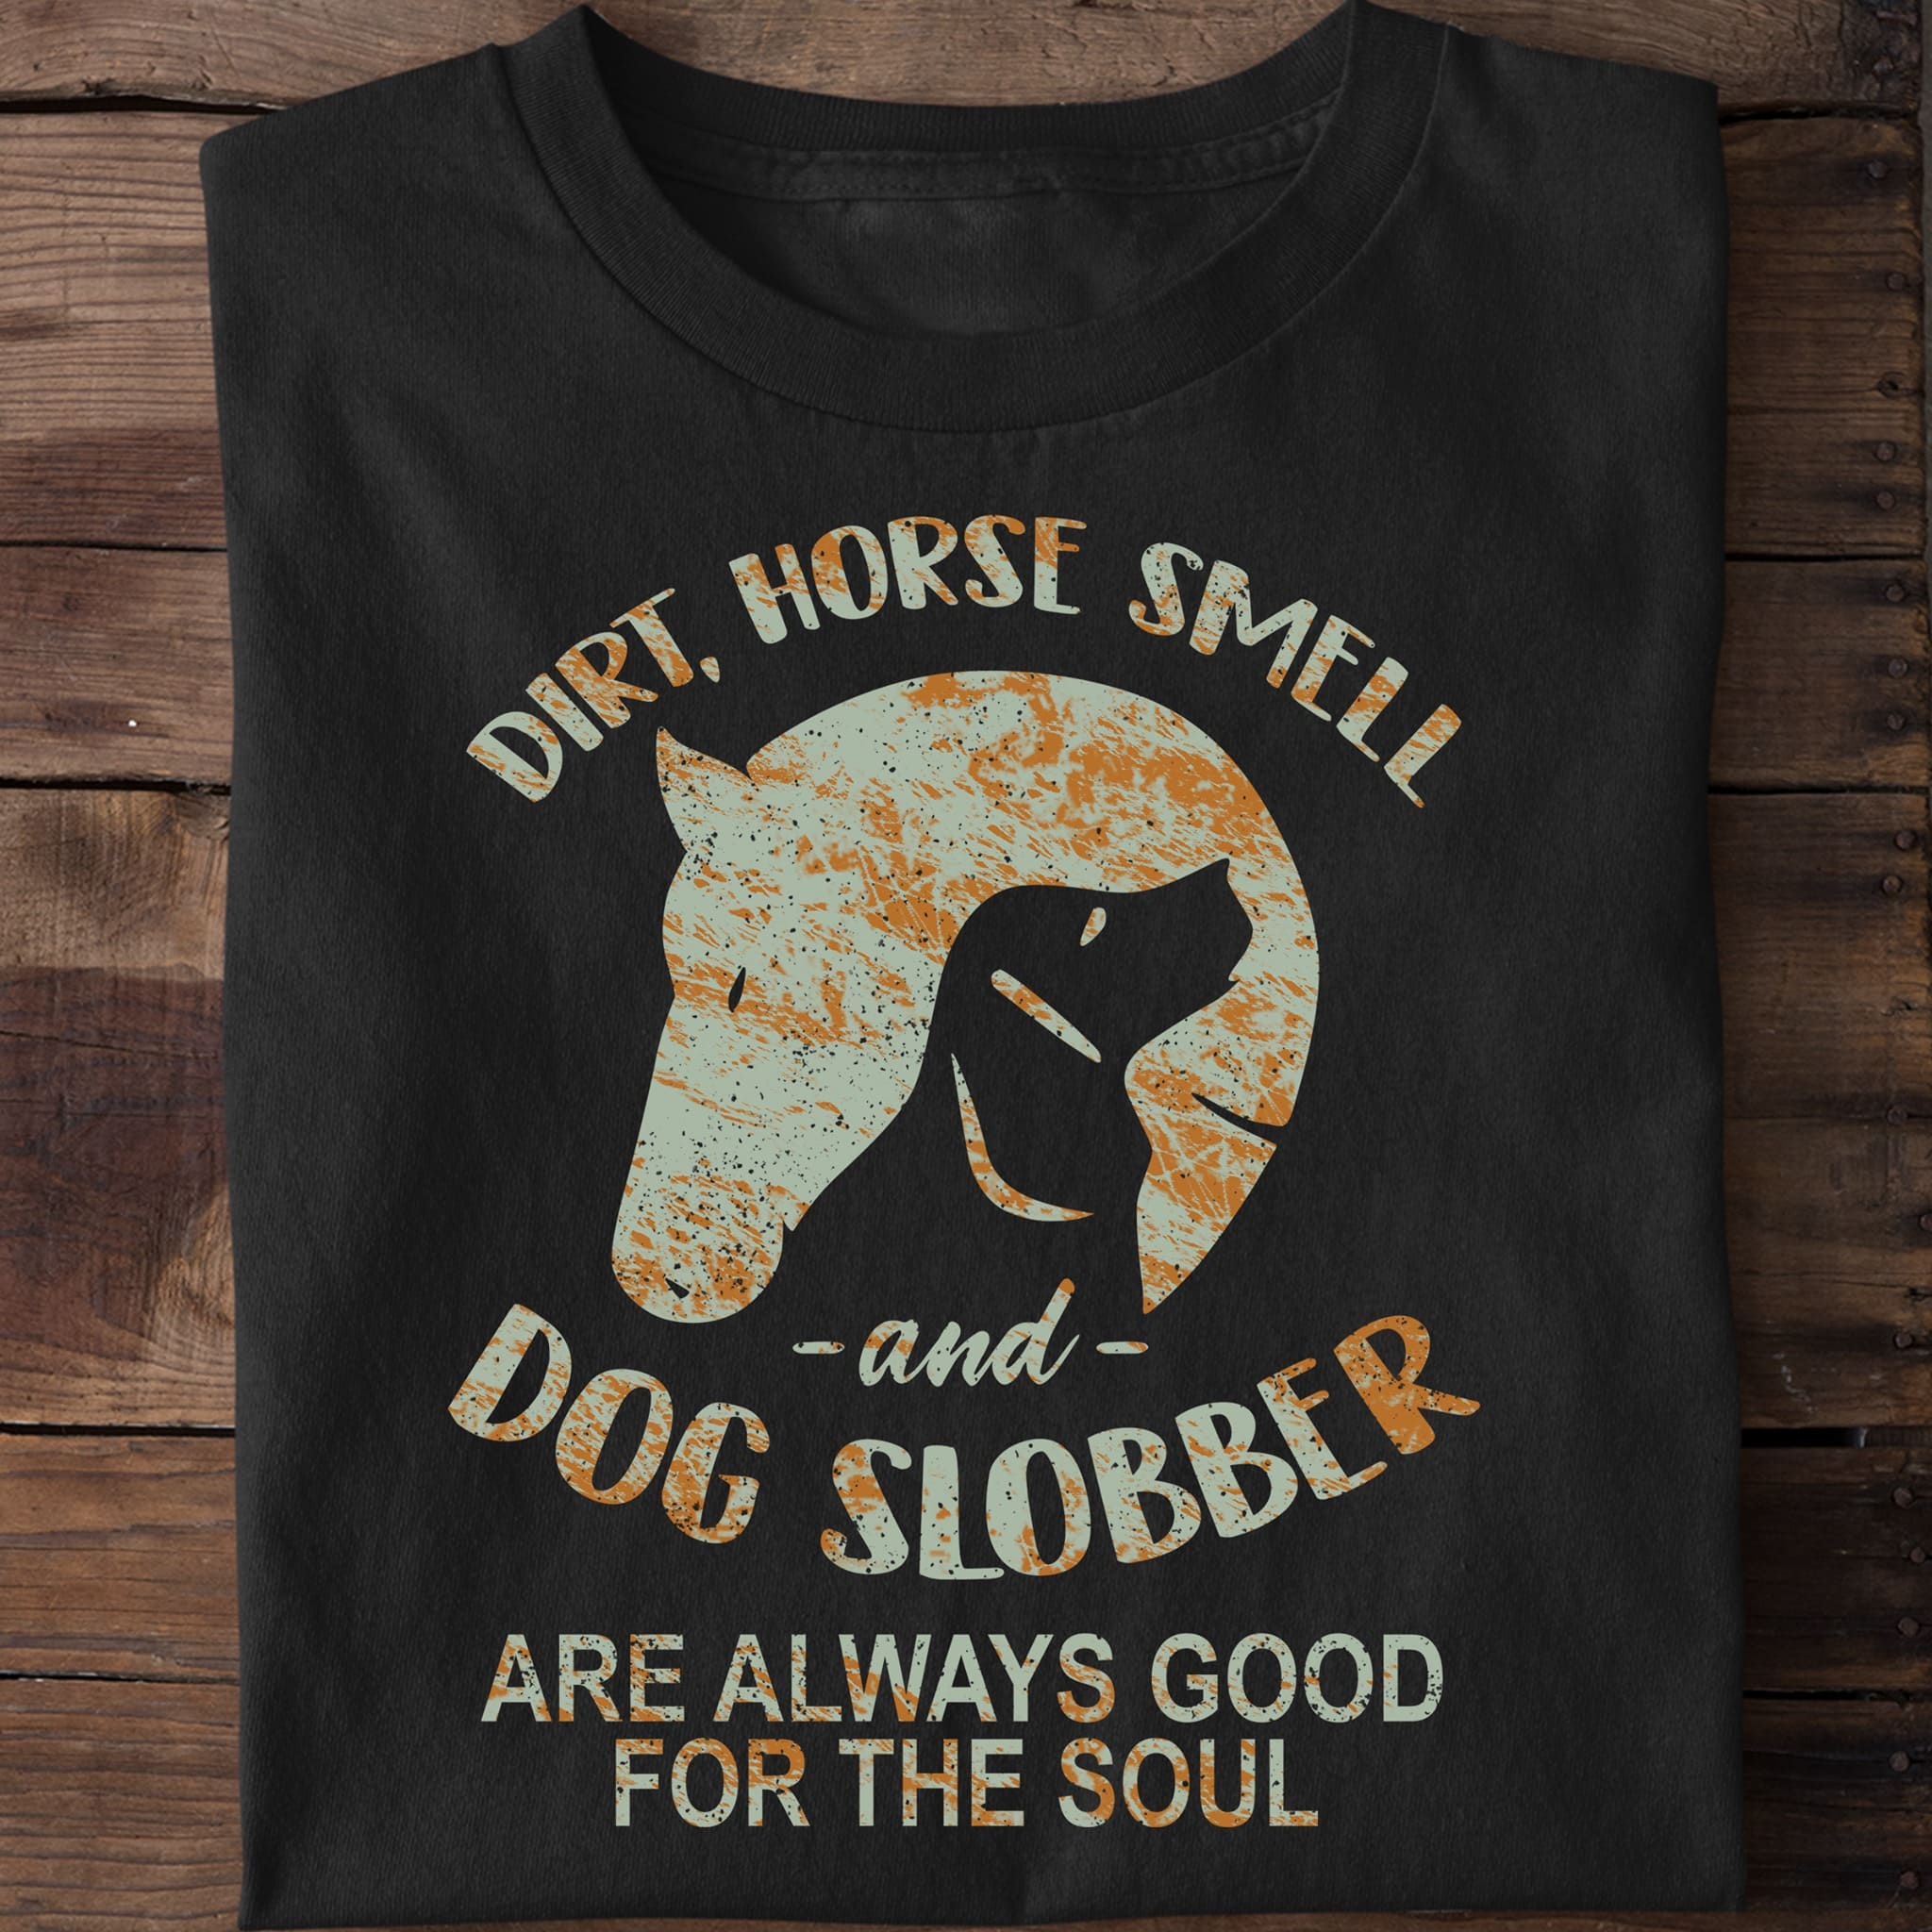 Dirt, horse smell and dog slobber are always good for the soul - Dog and horse, dog horse graphic T-shirt